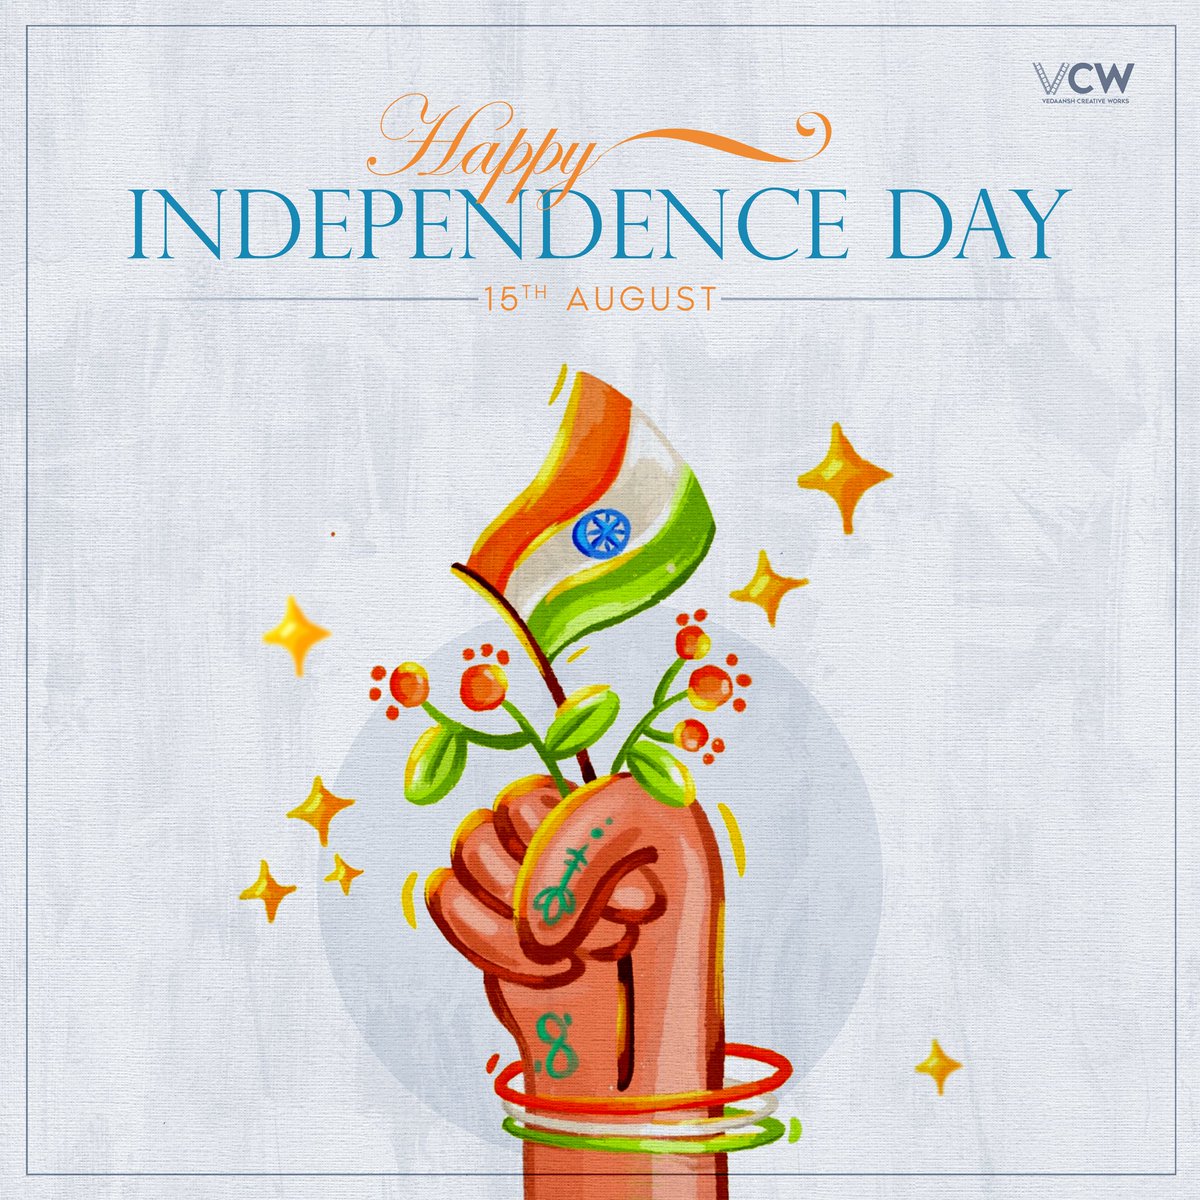 Wishing everyone a #HappyIndependenceDay! Let's honor the pride of our glorious nation and pledge to always strive for its betterment together.